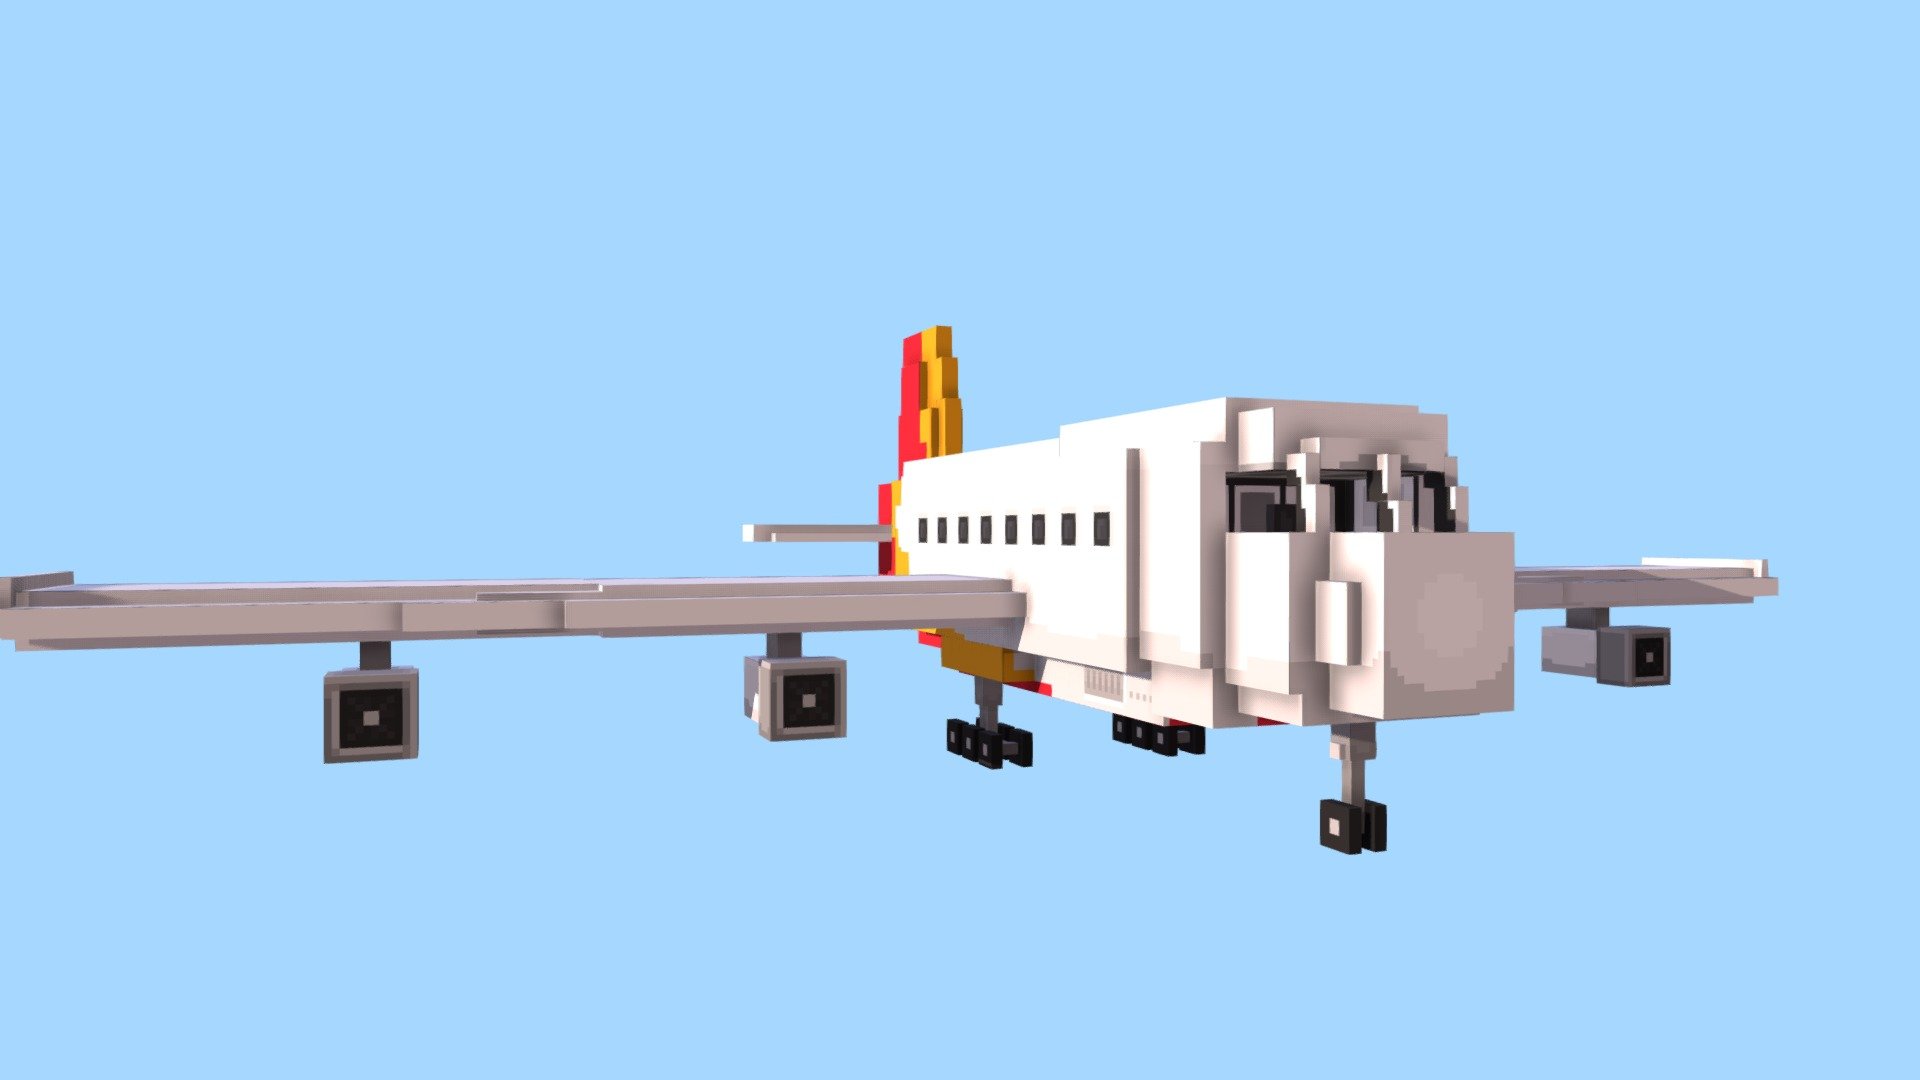 A passenger plane made in Blockbench for Minecraft Bedrock Edition for Spark-Squared’s Marketplace map “Planes” - Jumbo Jet - 3D model by JannisX11 3d model